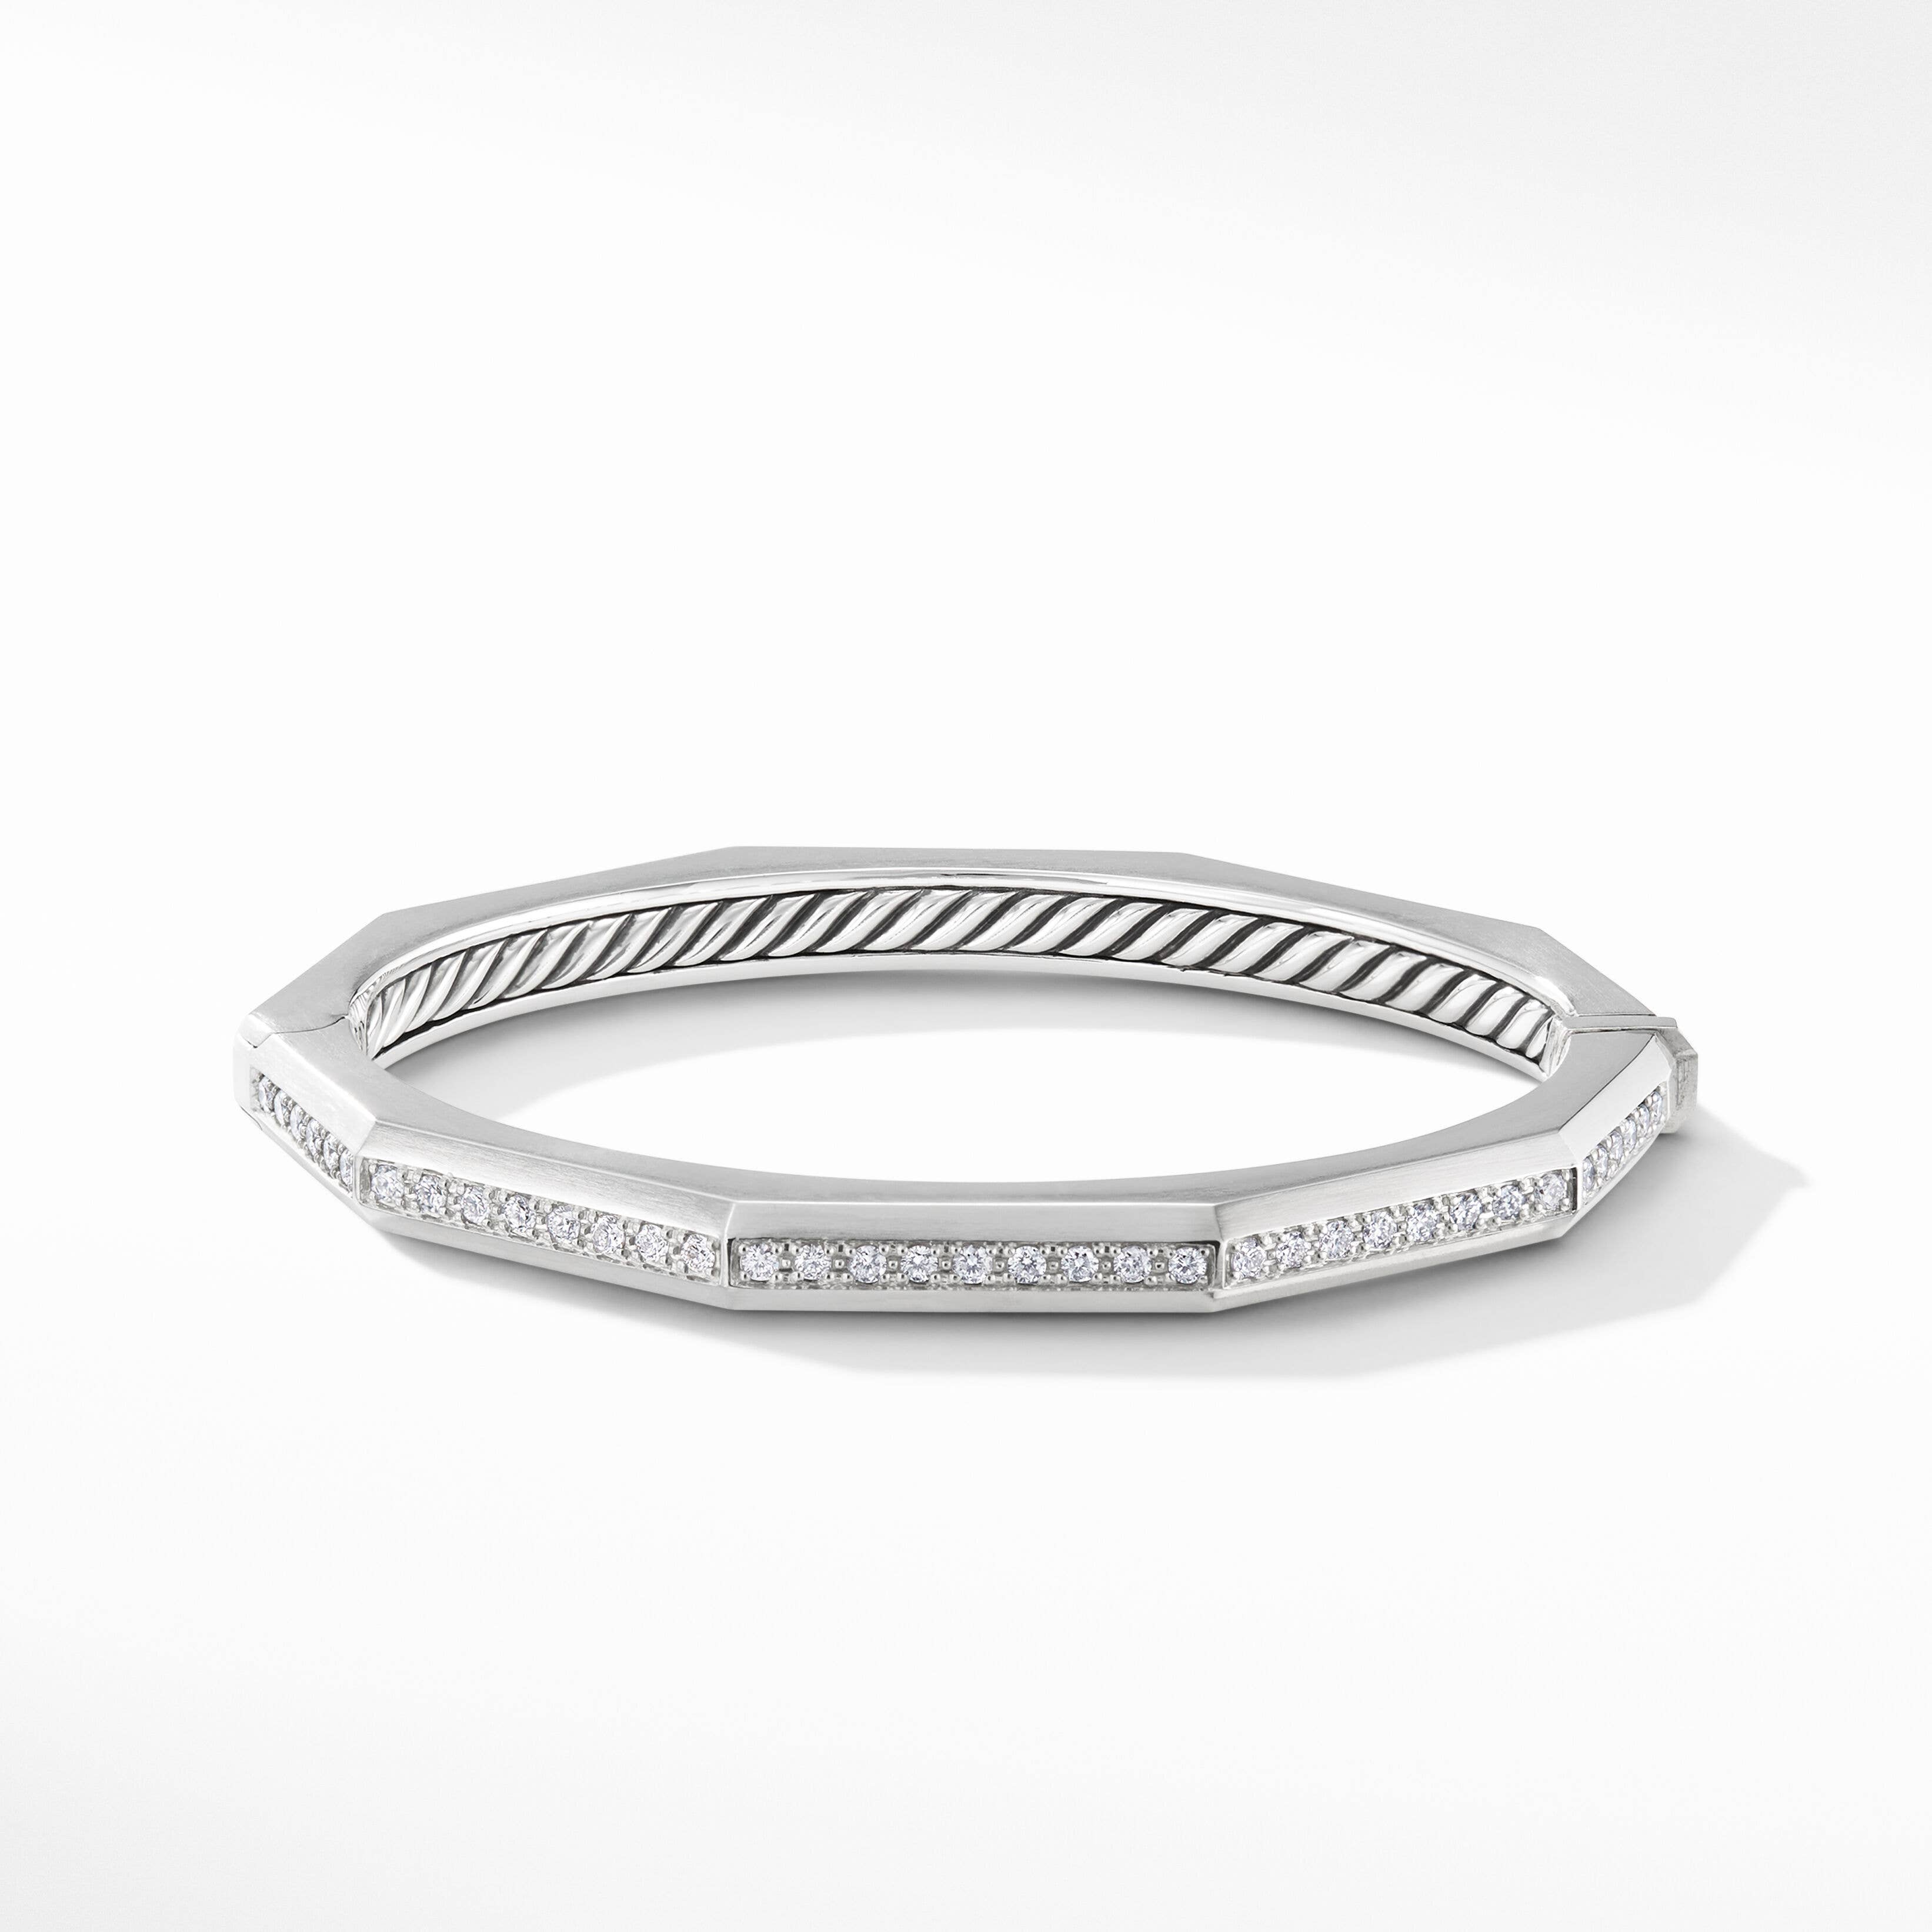 Stax Faceted Bracelet in Sterling Silver with Pavé Diamonds